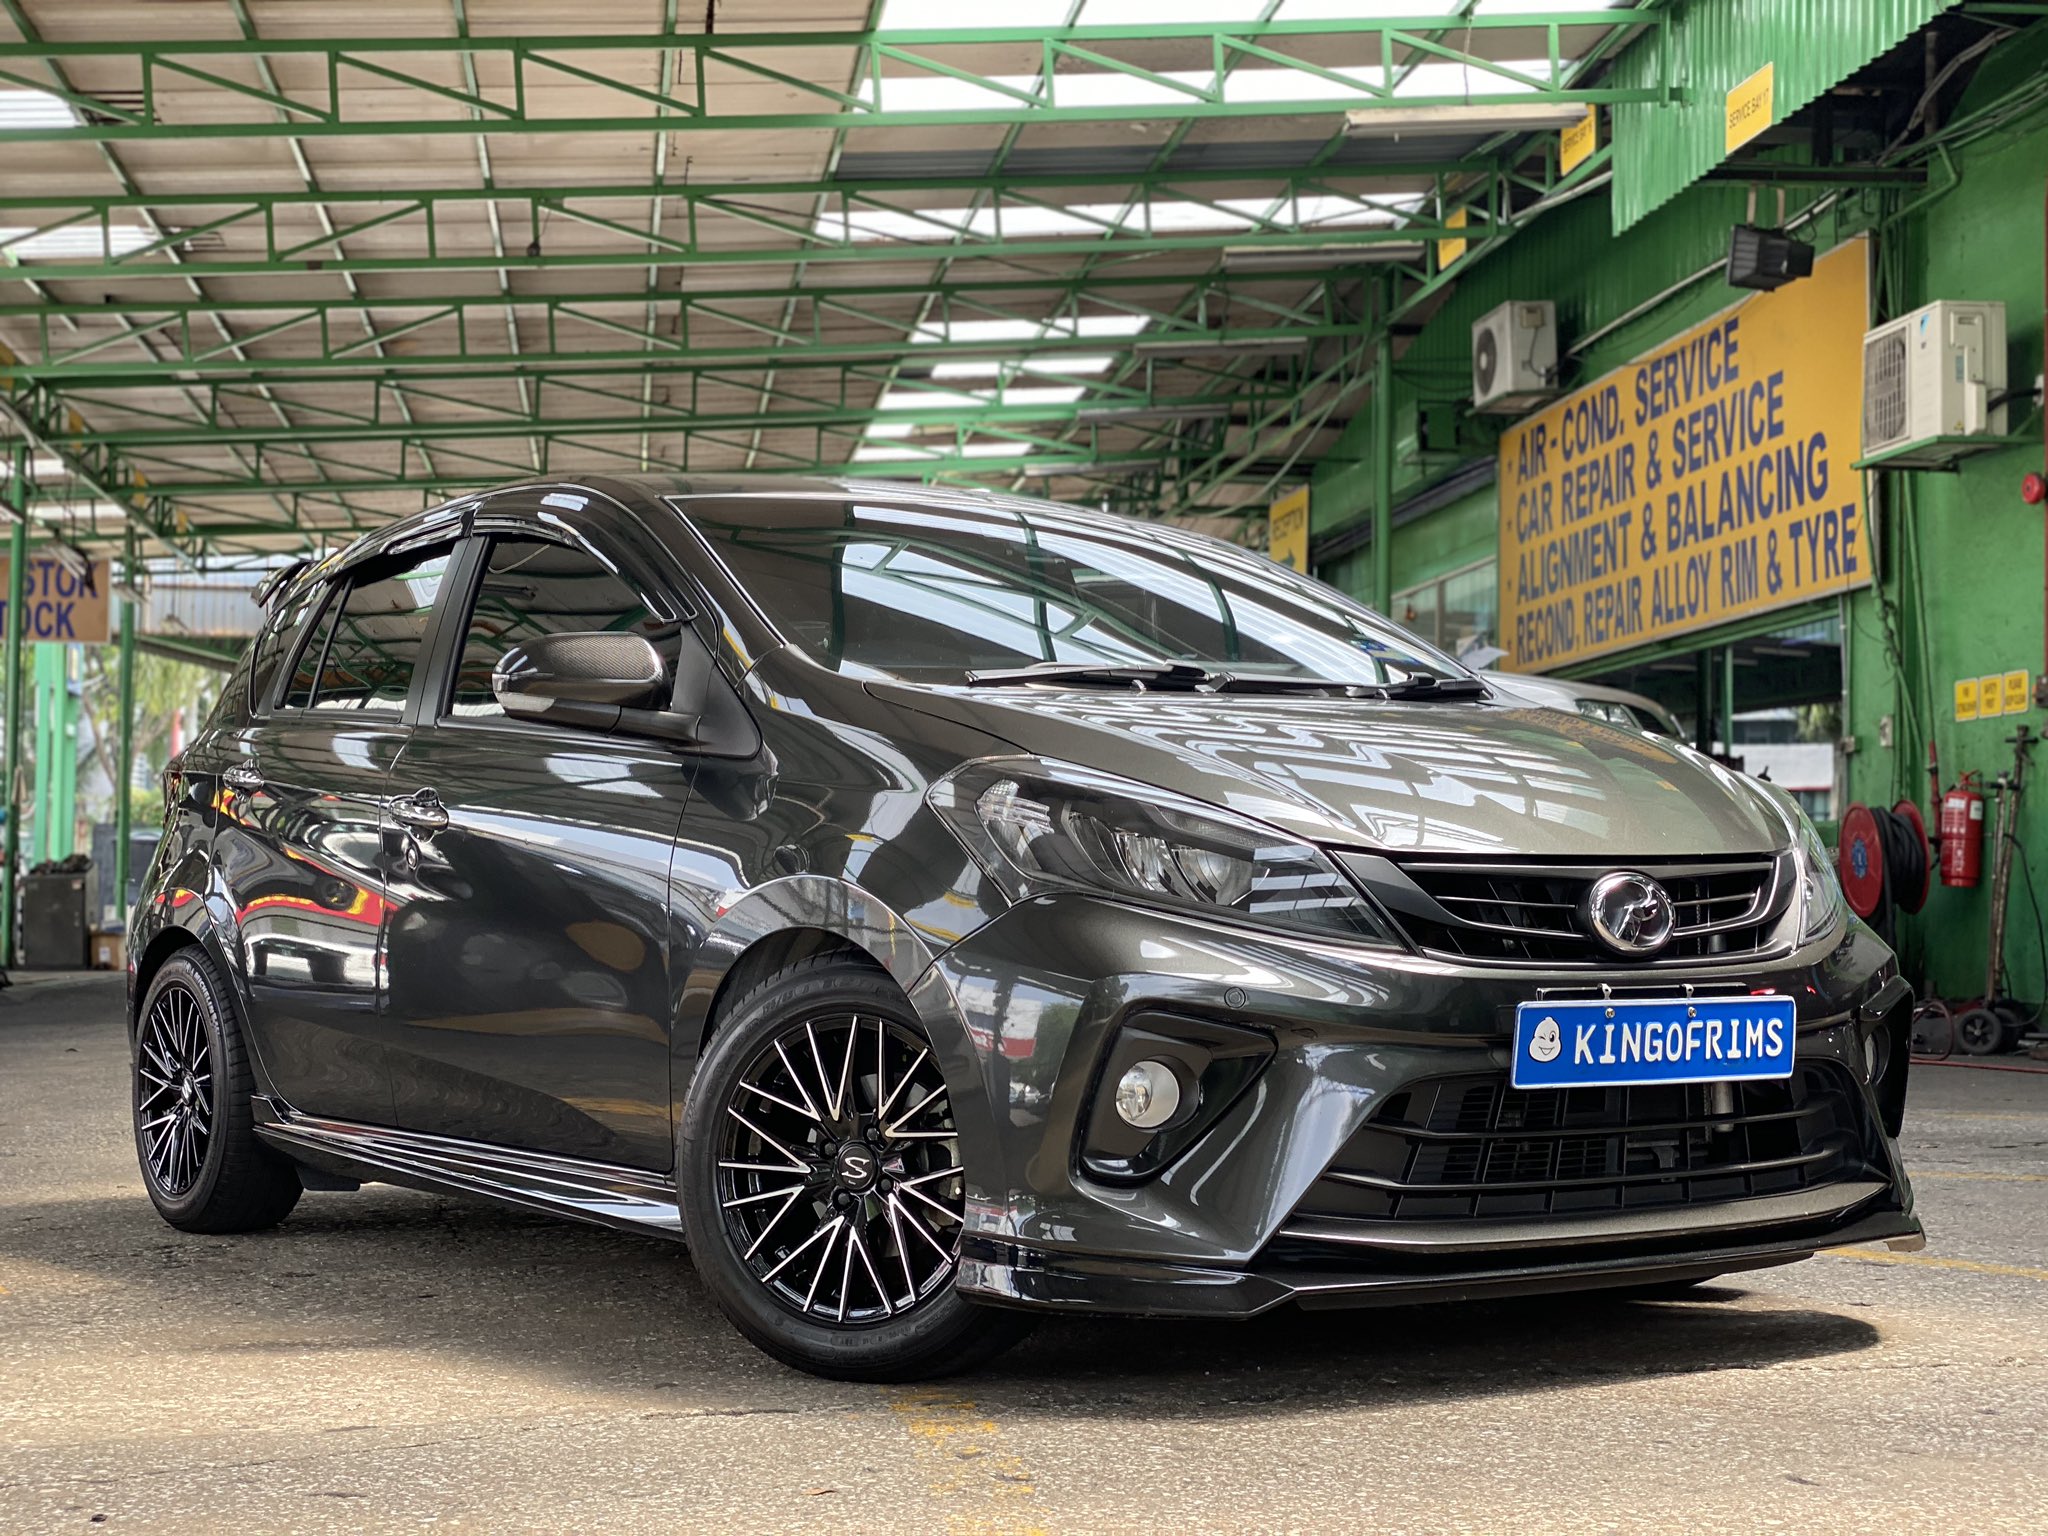 Kingofrimsmalaysia Sur Twitter Myvi With New 15 Inch Lenso Spirit Akira Rim For Inqury Pls Message Me Sms Wechat 012 9820693 Or Whatsapp Me Directly Https T Co Onzrdy5lzs Myvi Myvimalaysia Myvilover Myviclubmalayisia Myviforlife Myvipride